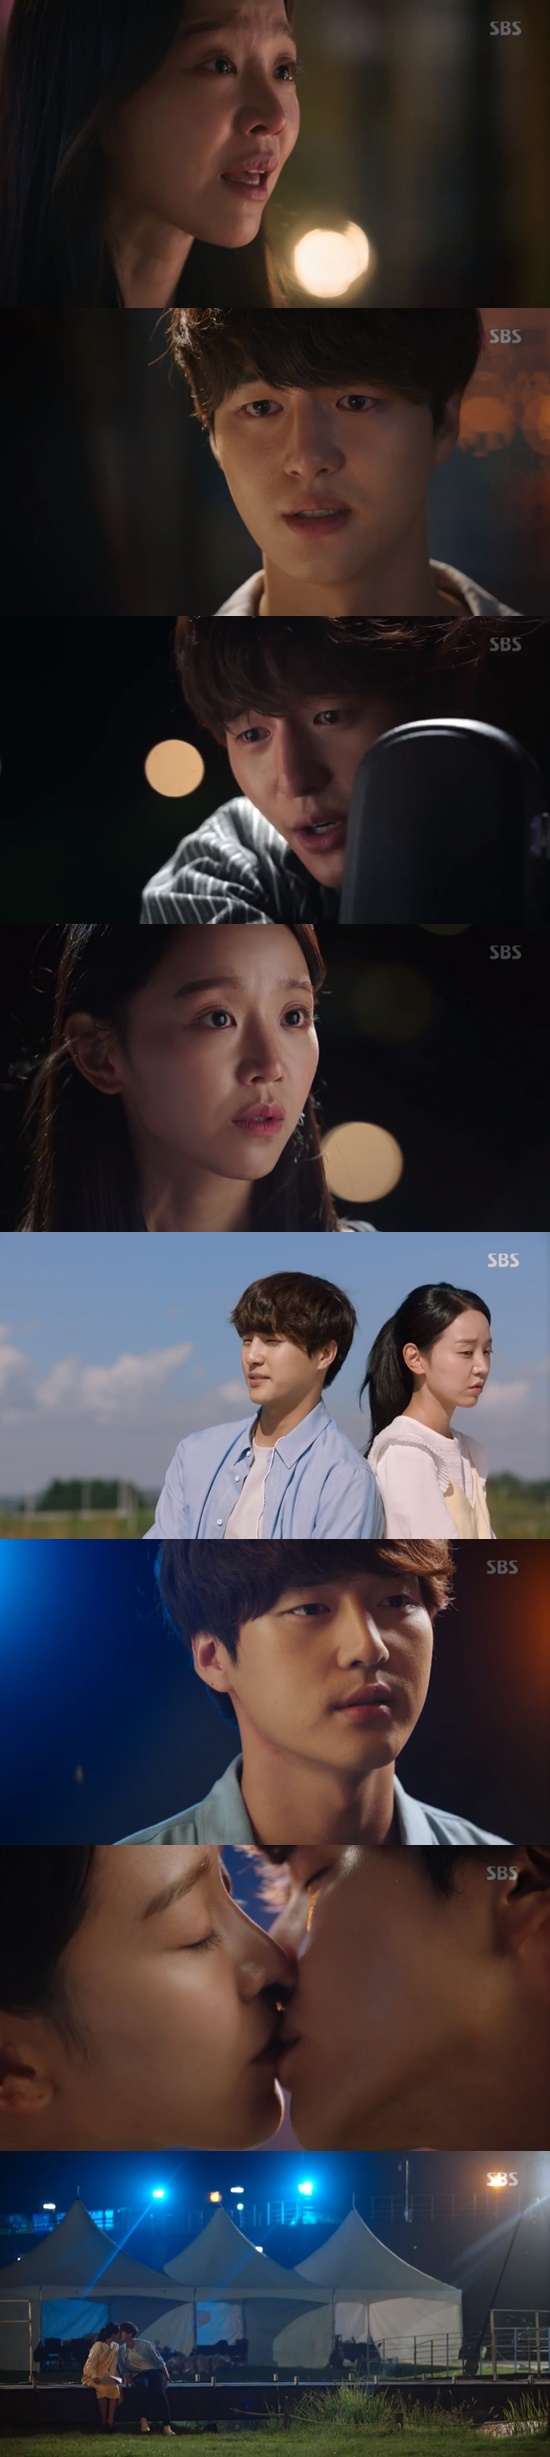 Thirty but seventeen, Yang Se-jong kissed Shin Hye-sun.In the 23rd and 24th SBS monthly drama Thirty but Seventeen, which was broadcast on the 4th, a scene of Confessions by Gong Woo-jin to Shin Hye-sun was broadcast.Utherly said, I can catch my favorite Violin again. I can stand on stage. My uncle, who left me, may come to see the article.But whats wrong with being hit by Lee Yong? He says Im fine.I am willing to be Lee Yong, but the Man from Nowhere is meddling. I like someone. No. I hate hurting women. Im hurt. And then I hate music that I love.If you get a bigger hurt, he said. Even if you get hurt, I get hurt and I get Lee Yong.If you can do Violin alone, you will have this opportunity. Utherly, however, regretted, looking back on his practice of Violin, who, after agonizing, gave up participating in the One Music Festival.Gong Woo-jin also searched for Ussari to apologize.After that, Gong Woo-jin and Utheri met on the overpass. Im sorry. I shouldnt have said that. I did not want to hurt you.I was proud of my blistering hand when I played it funny, but now I am so embarrassed by my hand.If I stood on stage like this, I would have been like this hand. Its an opportunity to find my uncle, he said. Im not a child. I know. Hes already abandoned me. Thank you.I do not hate my favorite music. I care about my work. I was scared, I think I was in the wrong way of someone elses life, and I might have been ruined again because I interfered, said Gong Woo-jin.Utherly said, I think its a good idea. Every time you come here, something good happens.I want to meet The Man from Nowhere, but I have to come here whenever I do not know where I am. Kwon Woo-jin said, It will not happen.I dont want to get away with it. Im worried. Sorry, sorry. Ill tell you everything. I want you to do everything you want to say.In particular, Gong Woo-jin prepared the one music festival and kept Utheri from feeling lonely.In the final scene, Gong Woo-jin was shown kissing Ussari. I like it, he said, while Usser said, I am too.Gong Woo-jin approached Ussari and kissed him.Photo = SBS Broadcasting Screen